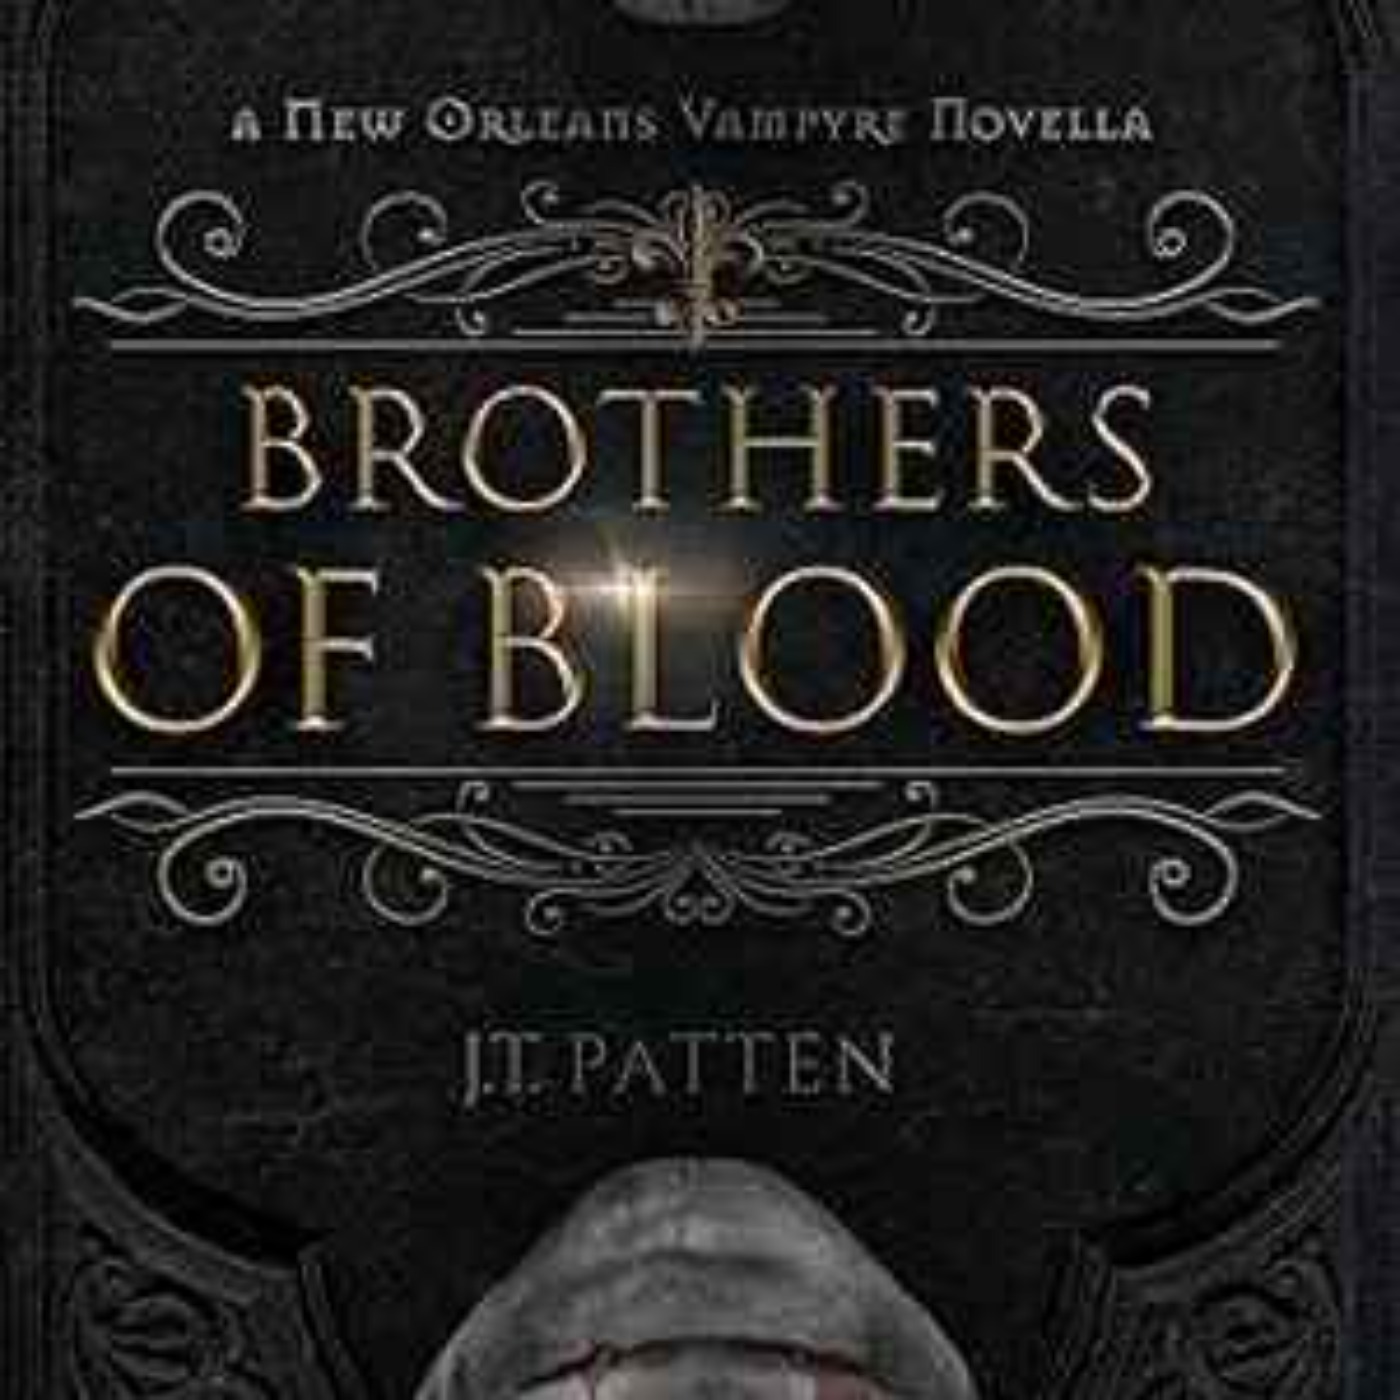 J.T. Patten - Brothers of Blood